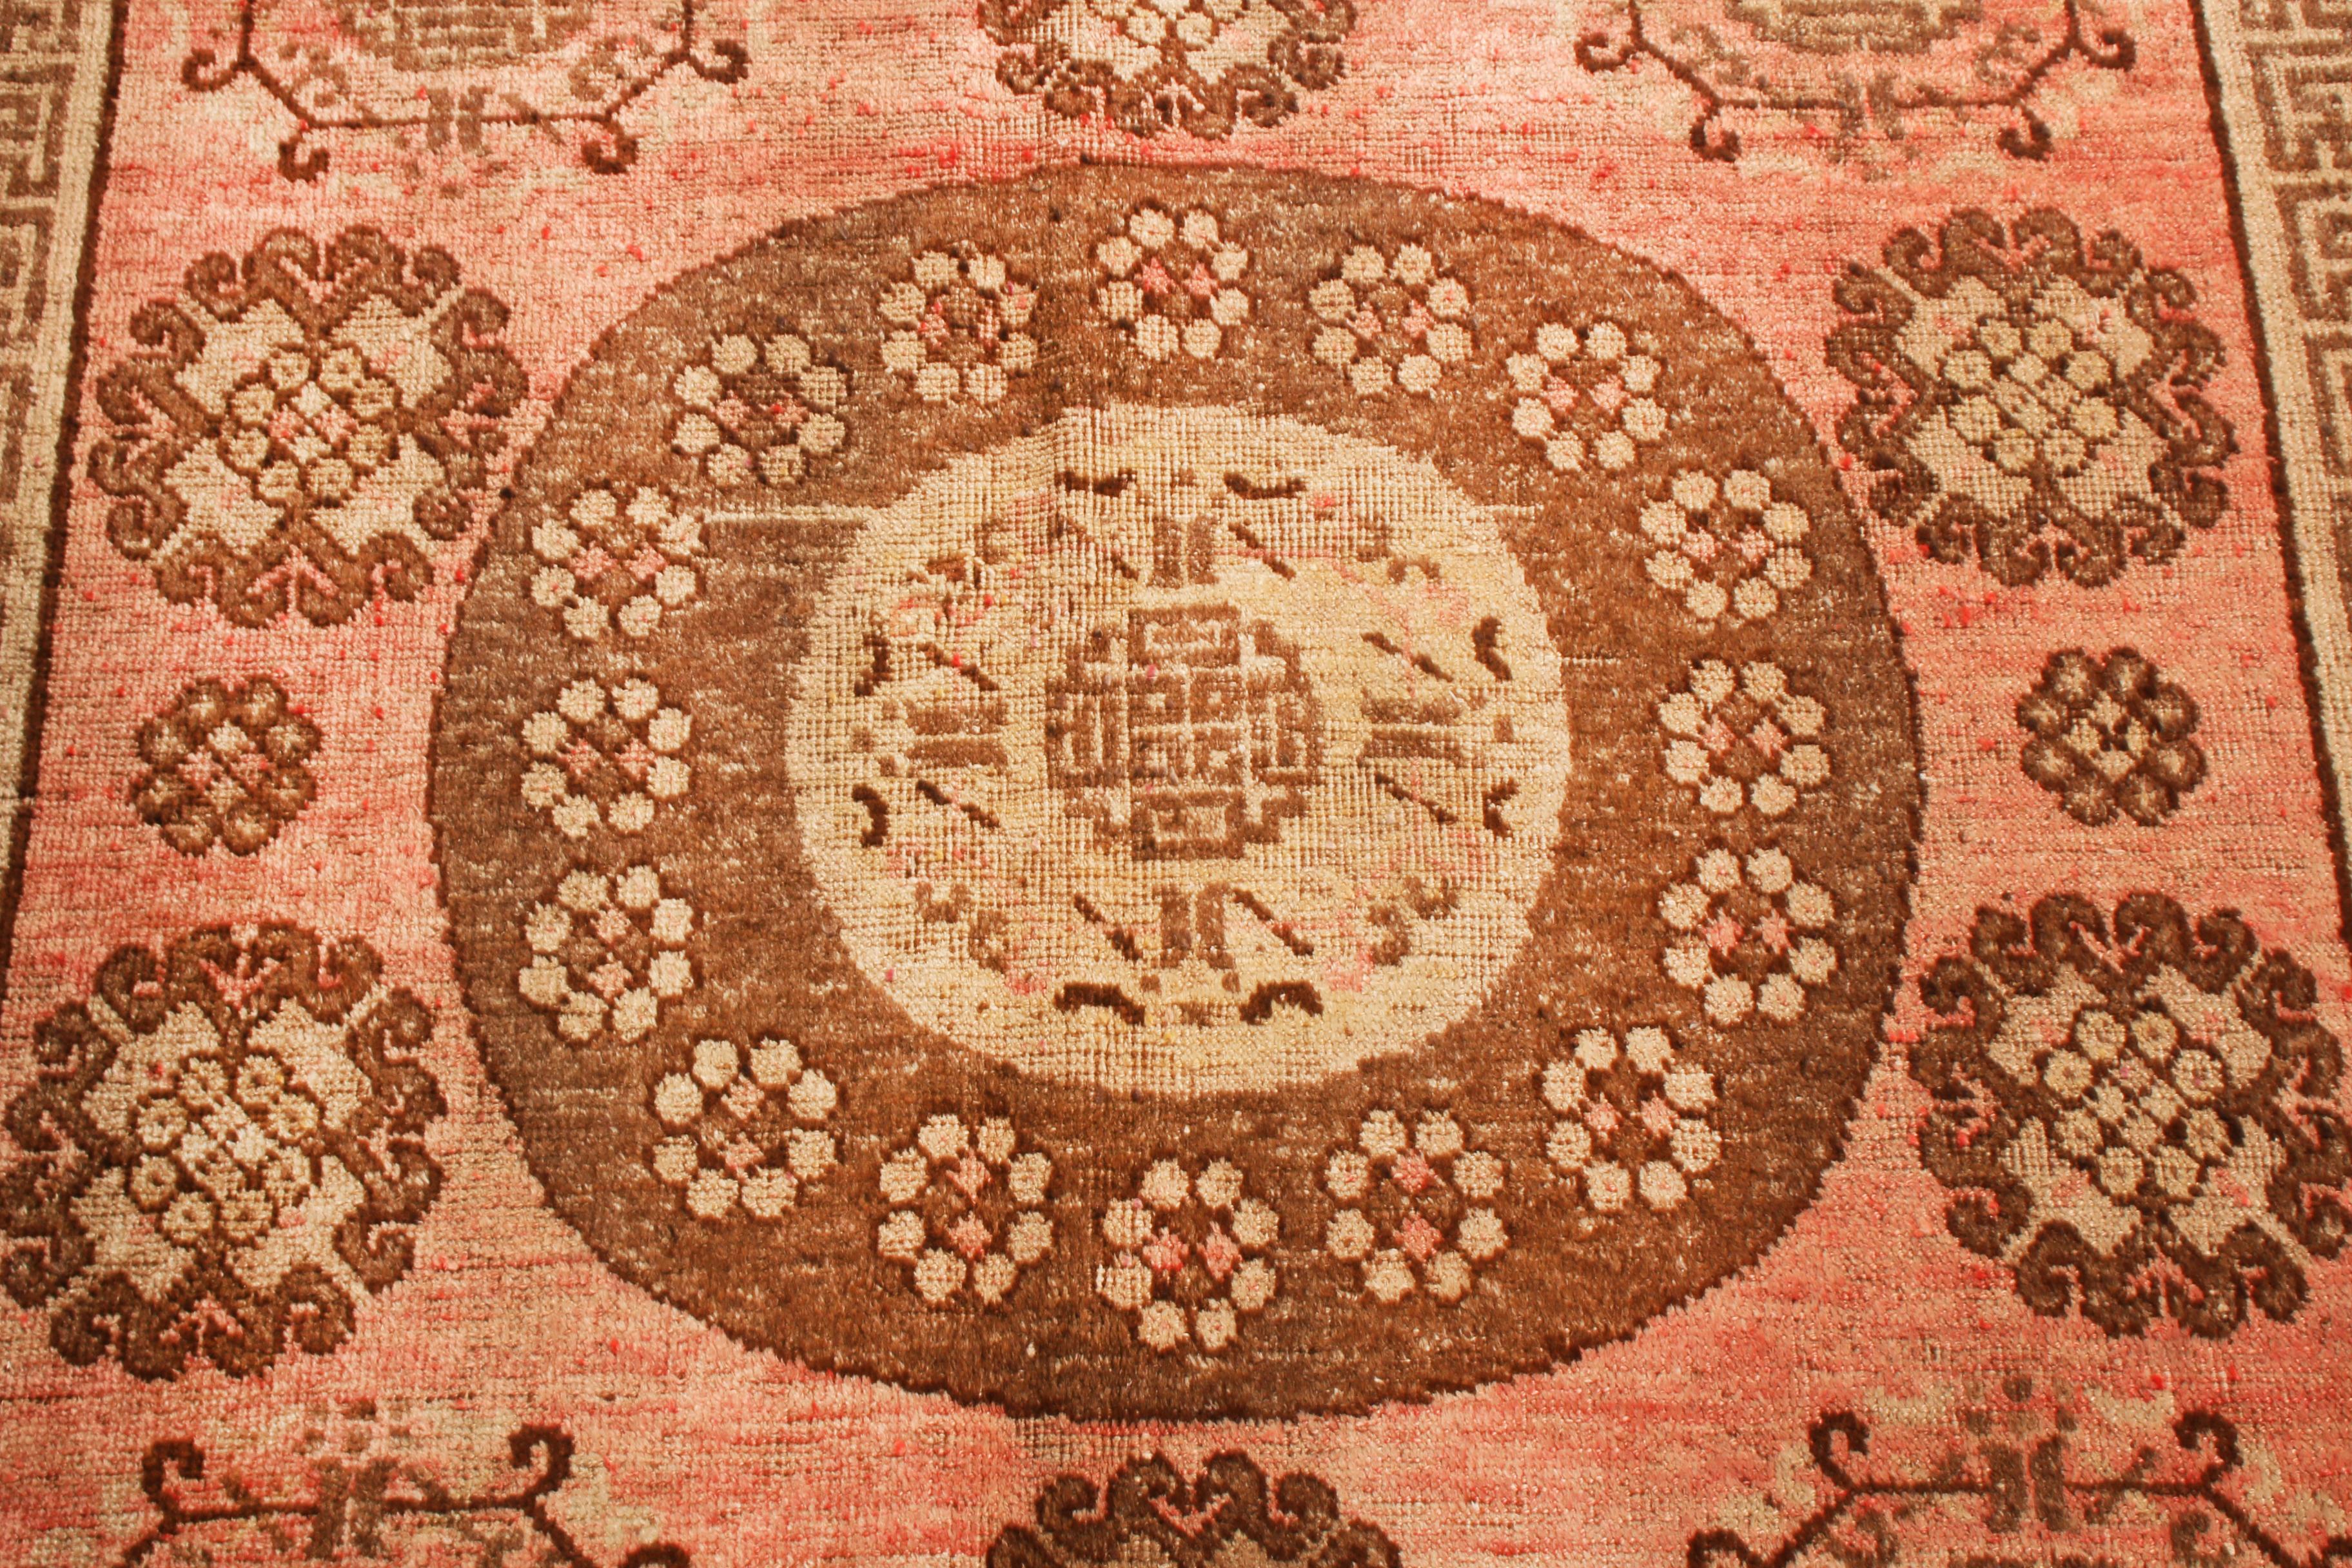 Originating from East Turkestan between 1920-1940, this semi-antique Khotan wool rug from Rug & Kilim employs traditional imagery in unique, pristine colorways. Handmade in high-quality wool, the medallion style field design depicts an ornate